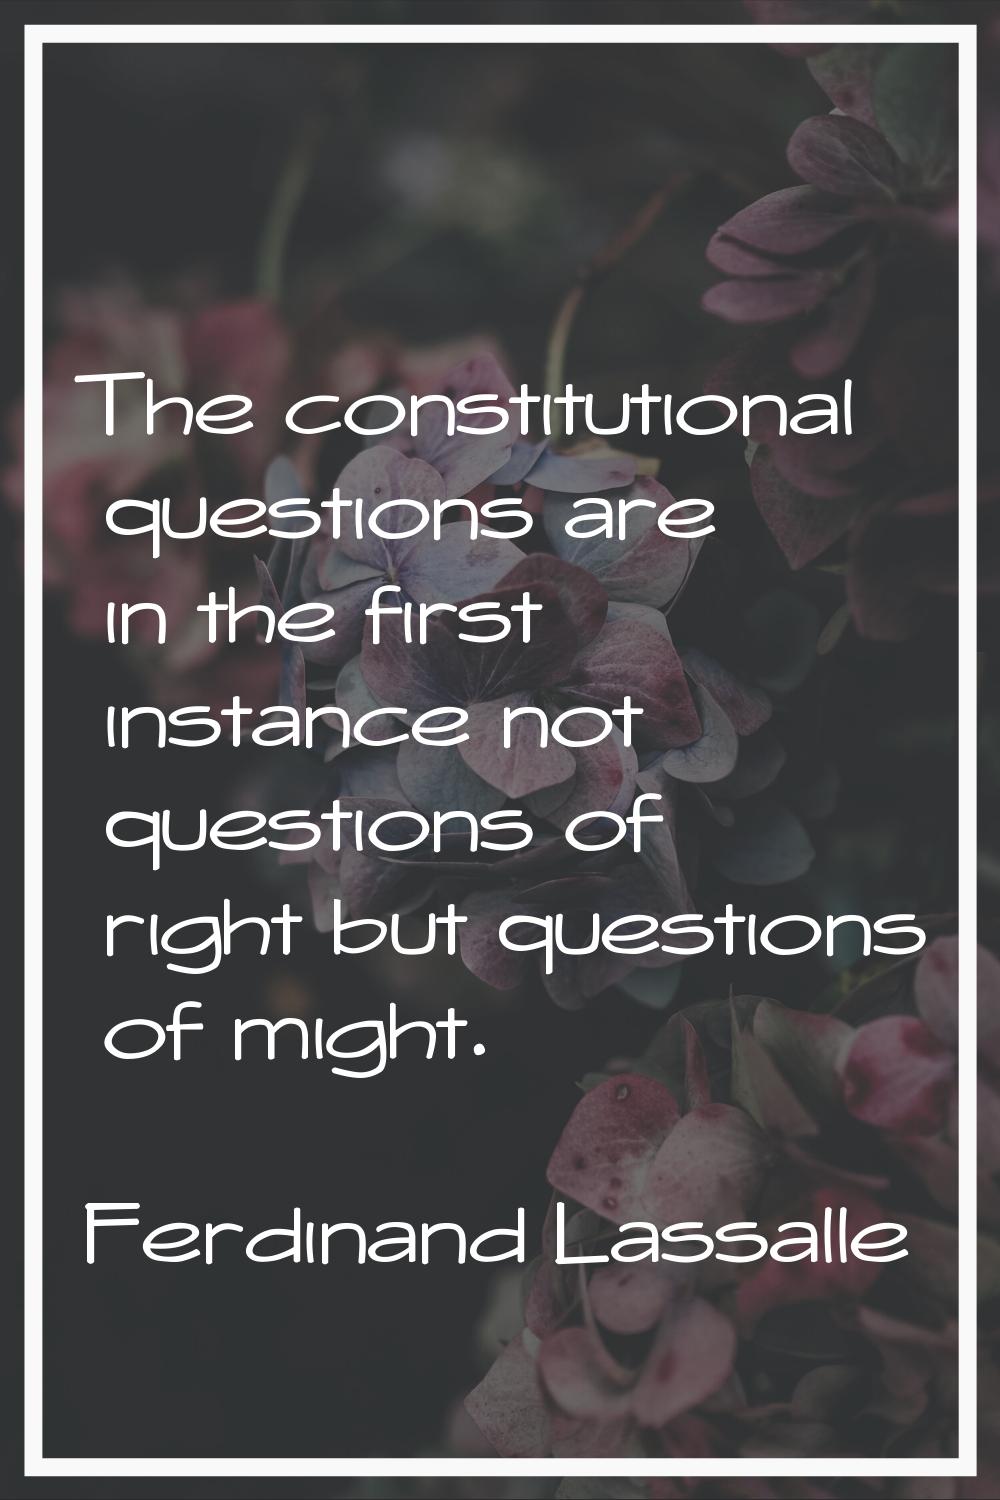 The constitutional questions are in the first instance not questions of right but questions of migh